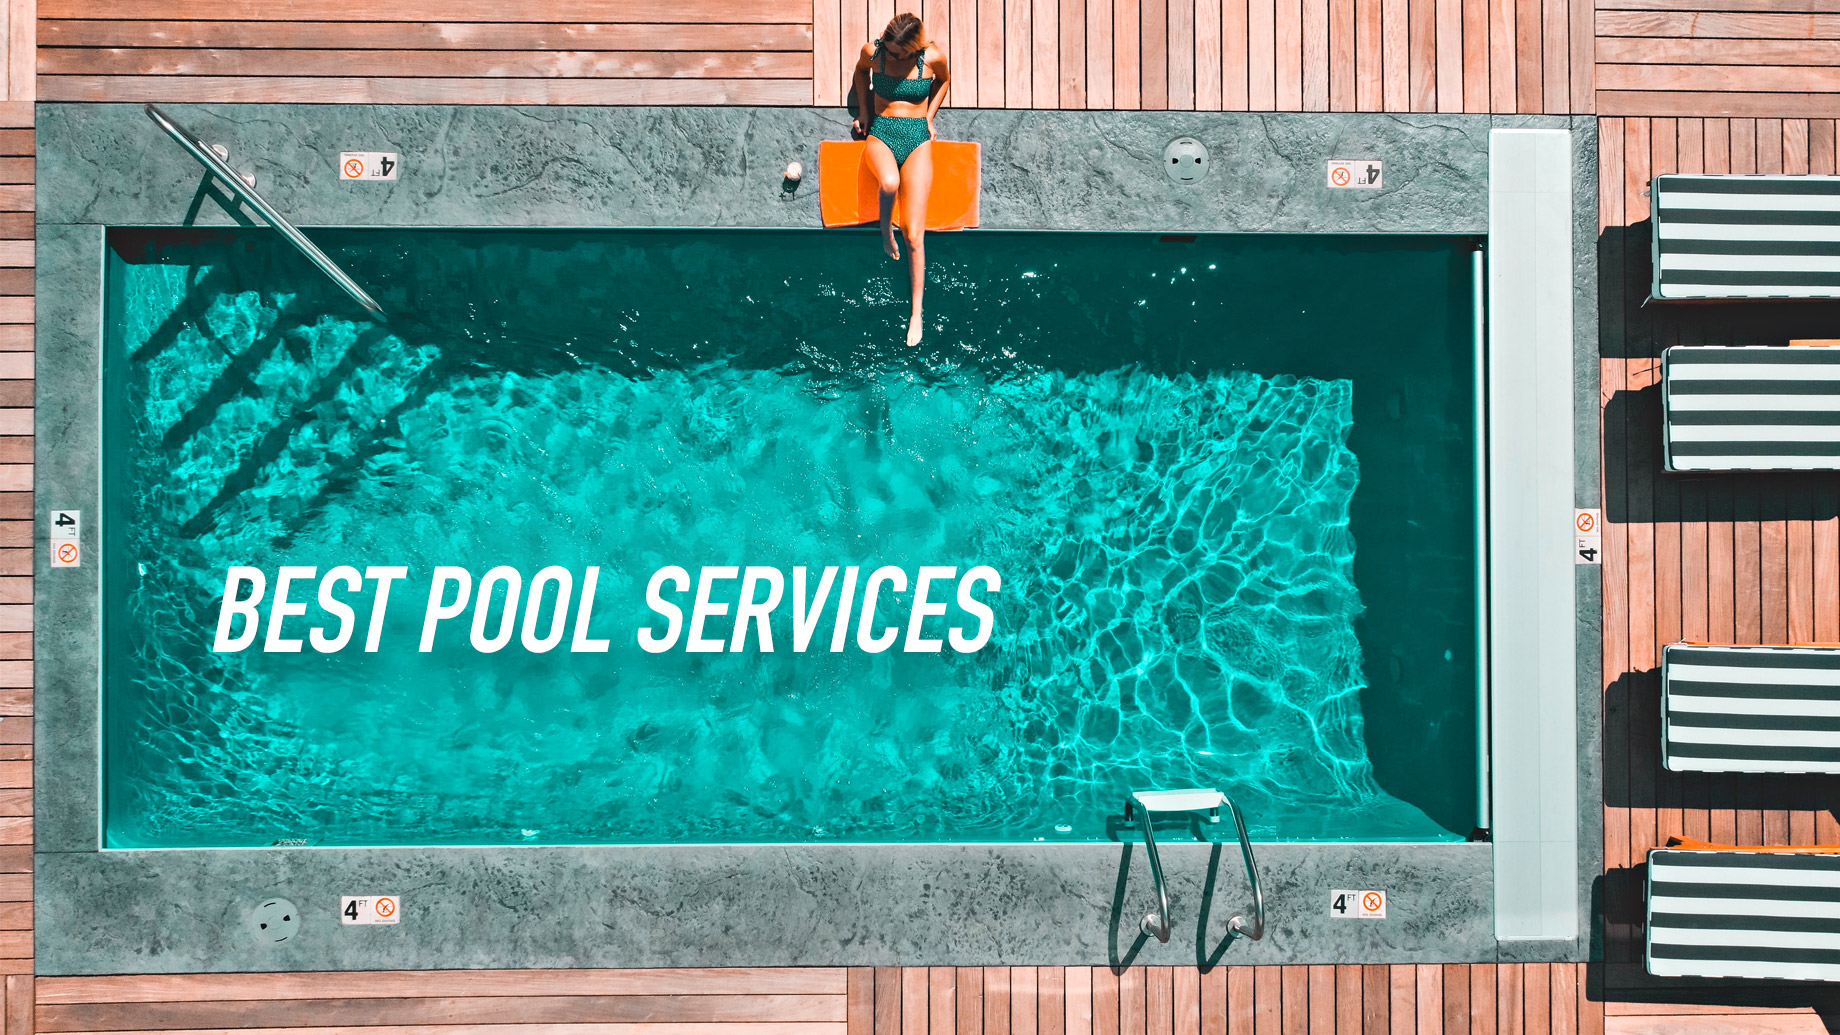 Best Pool Services - How To Find Them